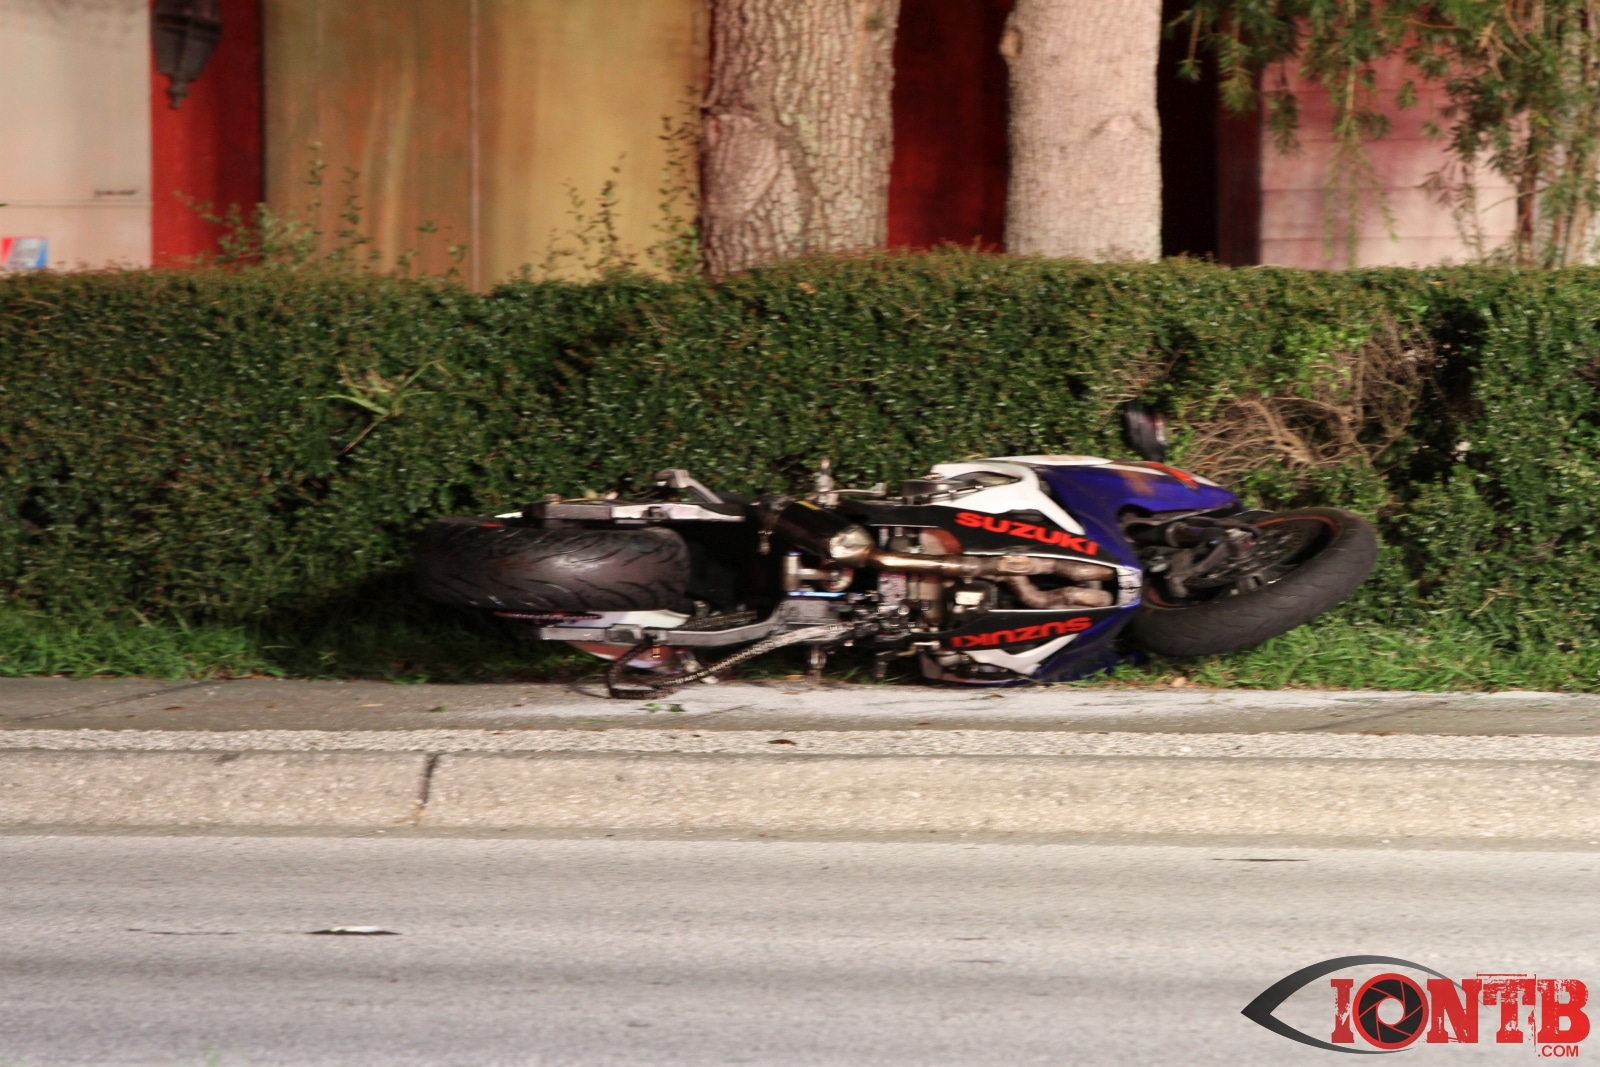 Two Motorcycles Down with Serious Injuries in Largo